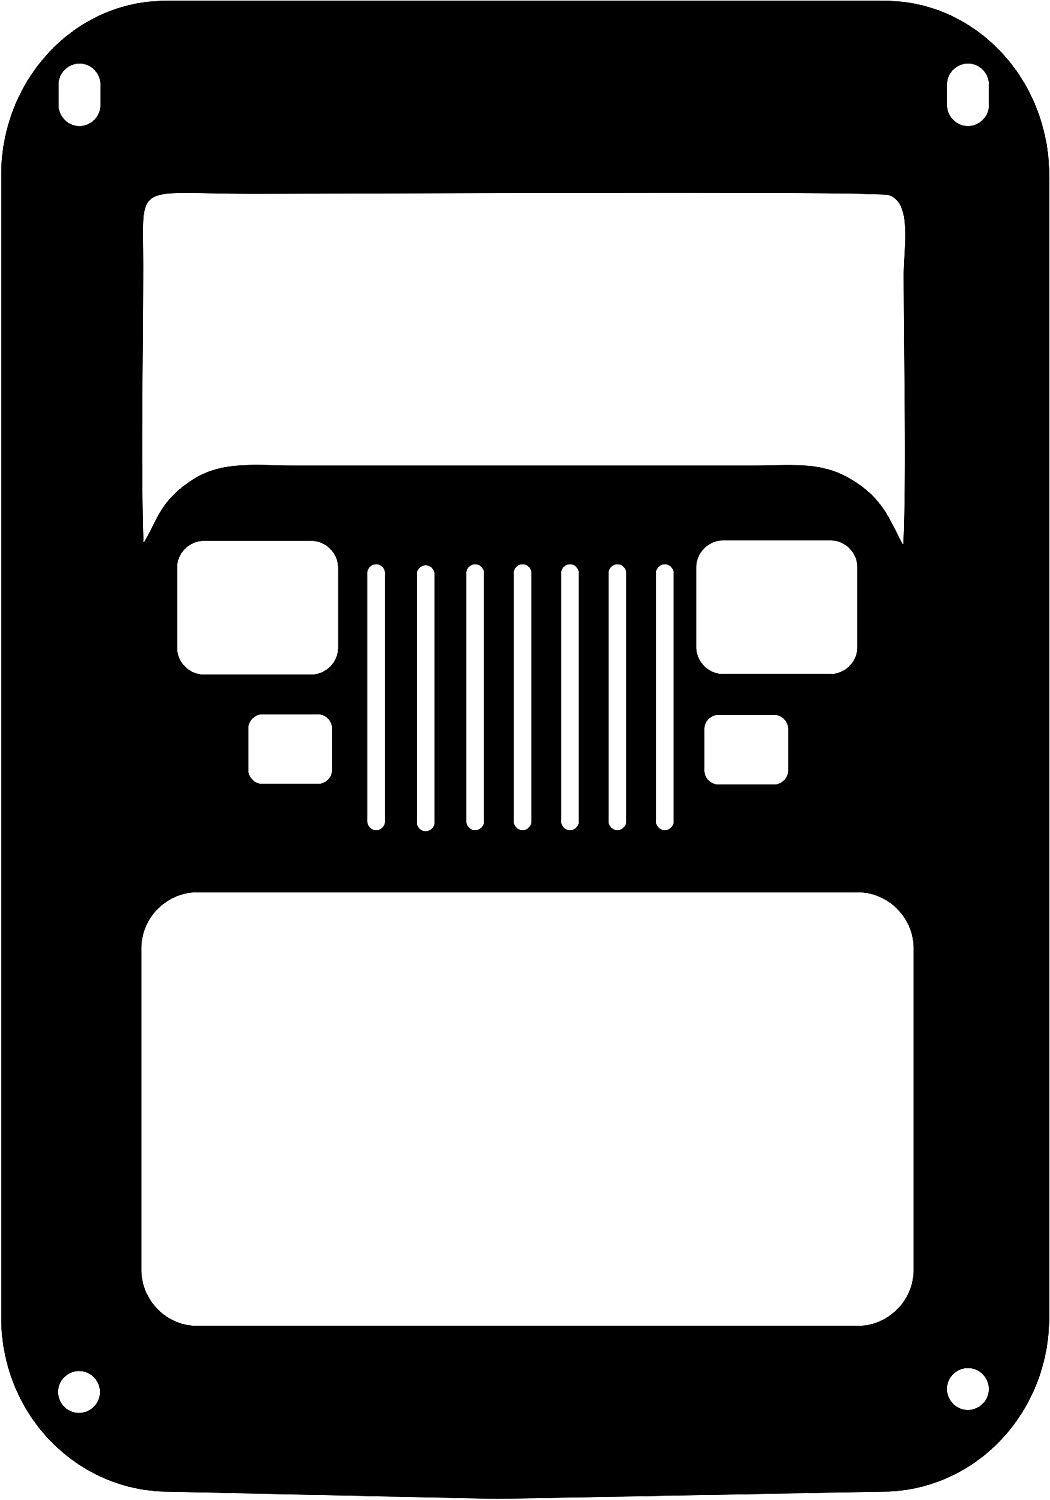 YJ Jeep Grill Logo - JeepTails Jeep Grill with Square YJ Lights JK